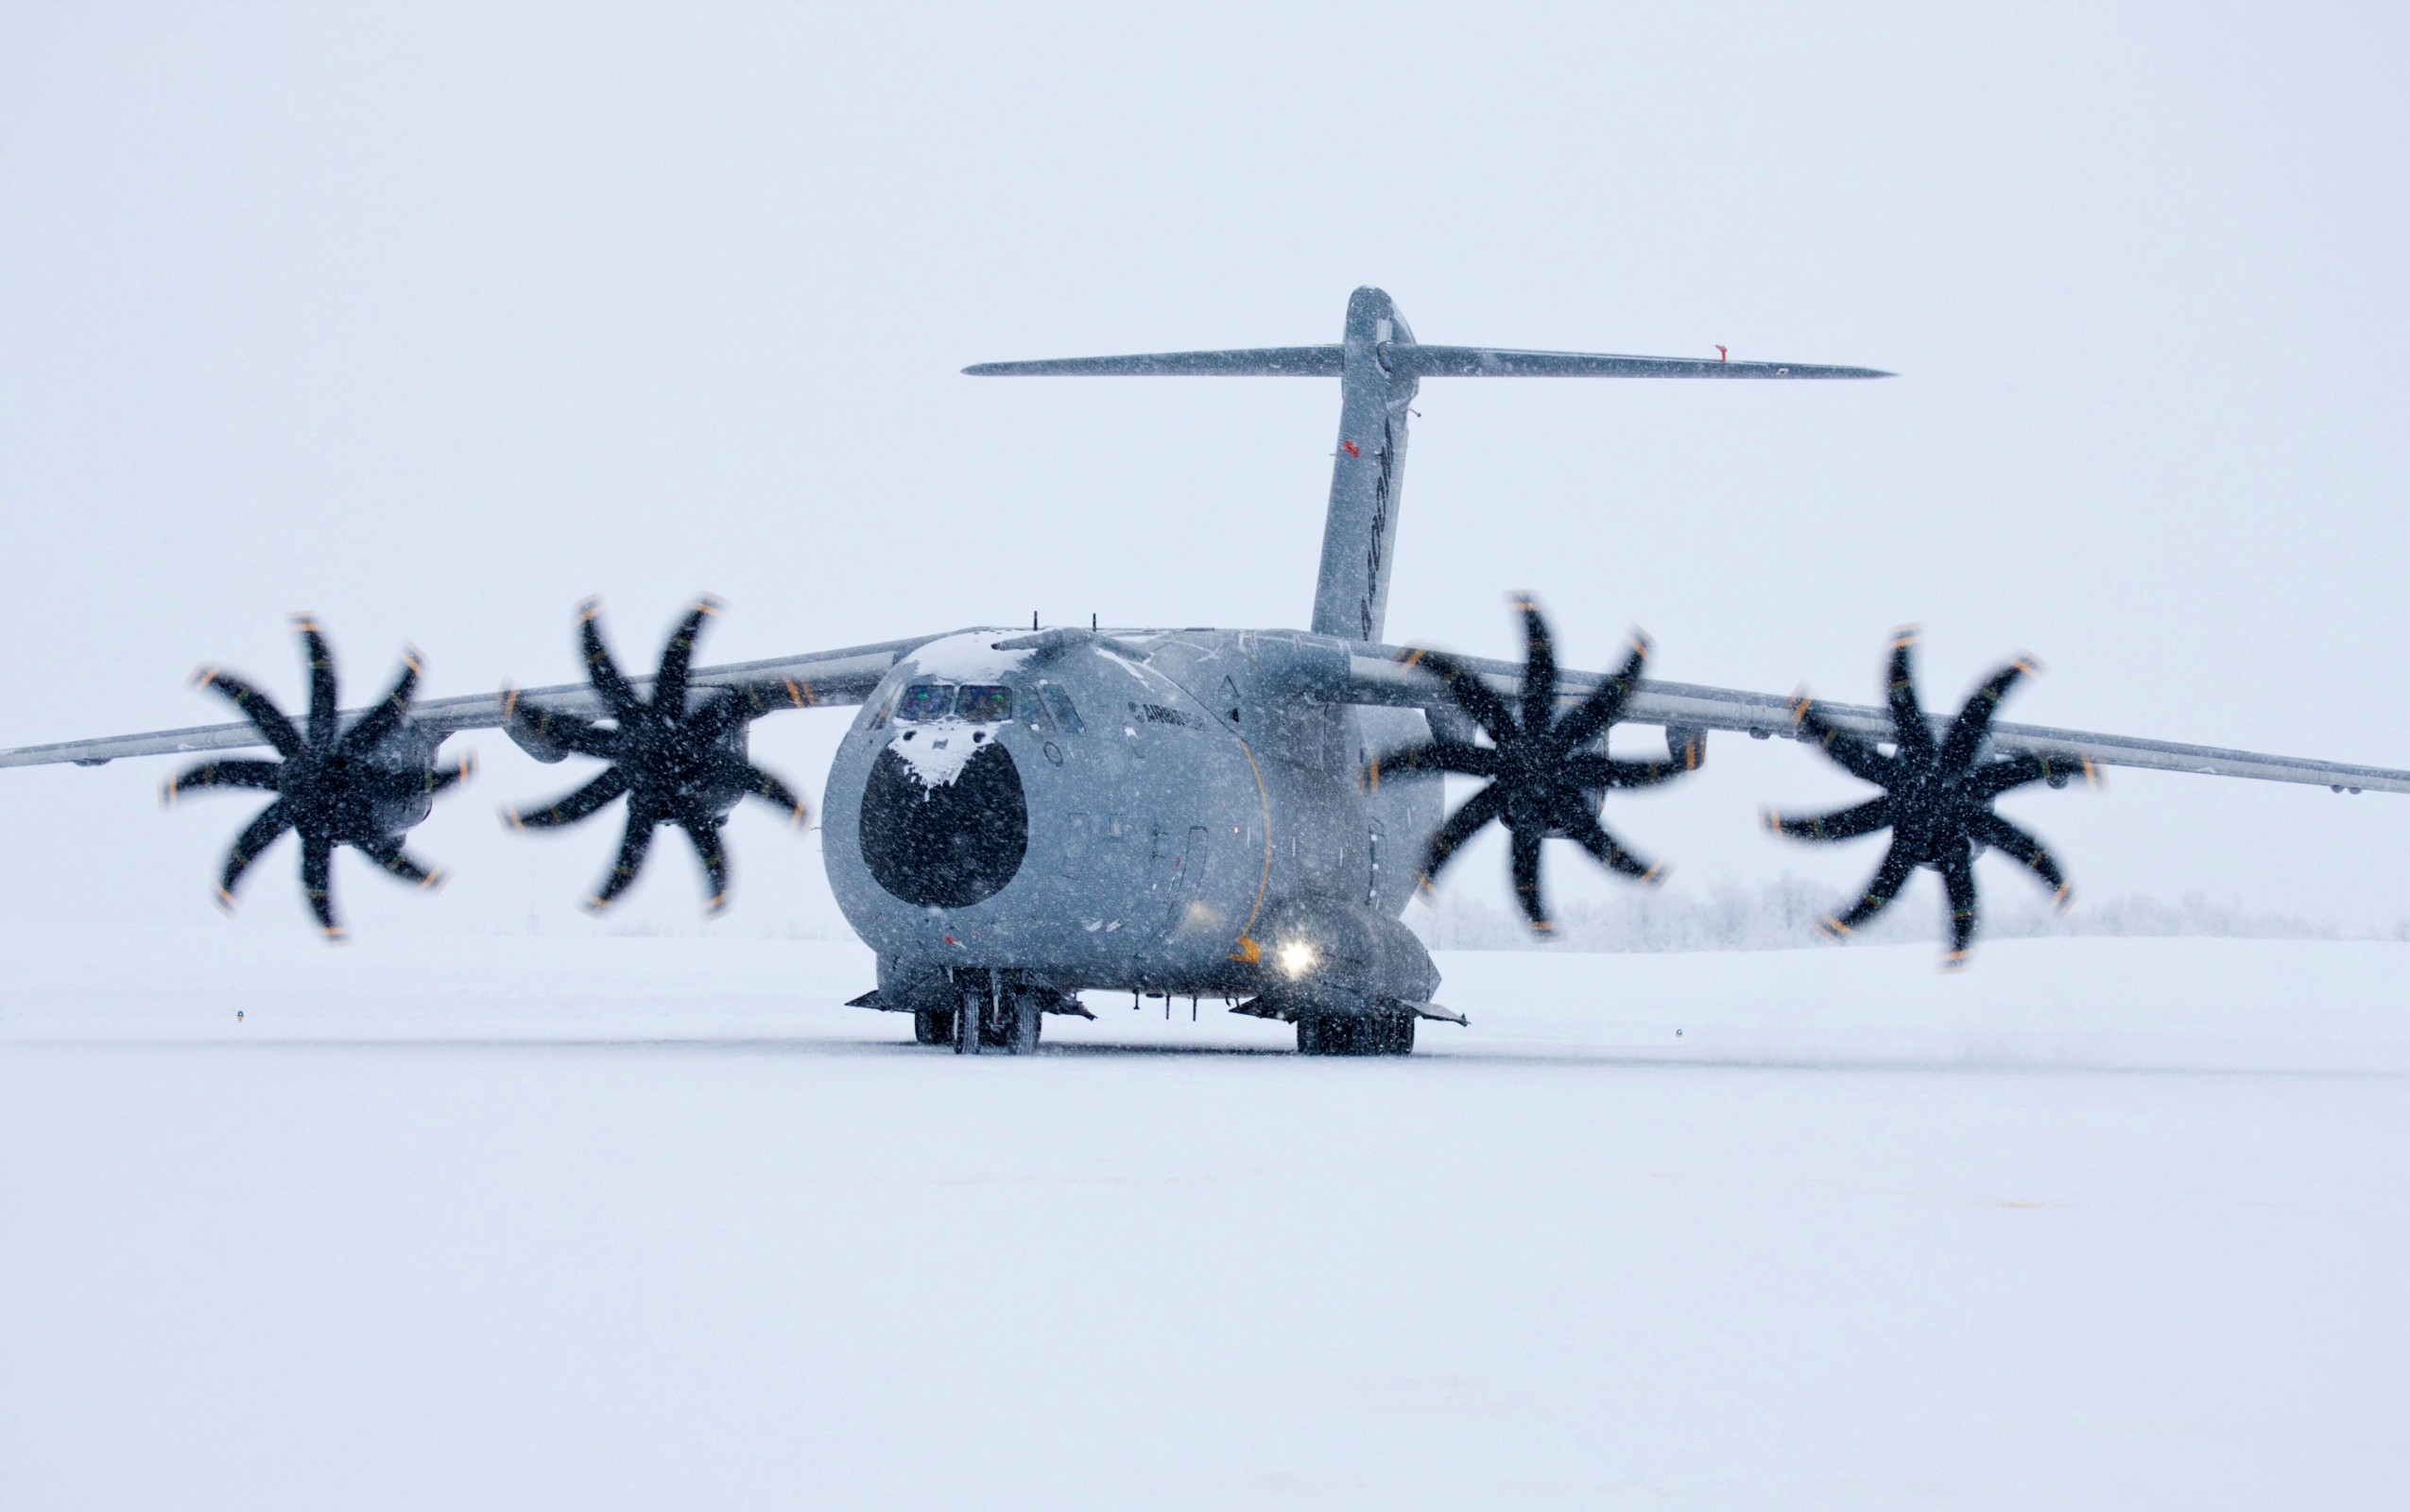 General 2550x1600 Airbus A400M Atlas military aircraft aircraft snow vehicle cold Airbus french aircraft military vehicle headlights frontal view snowing snow covered winter